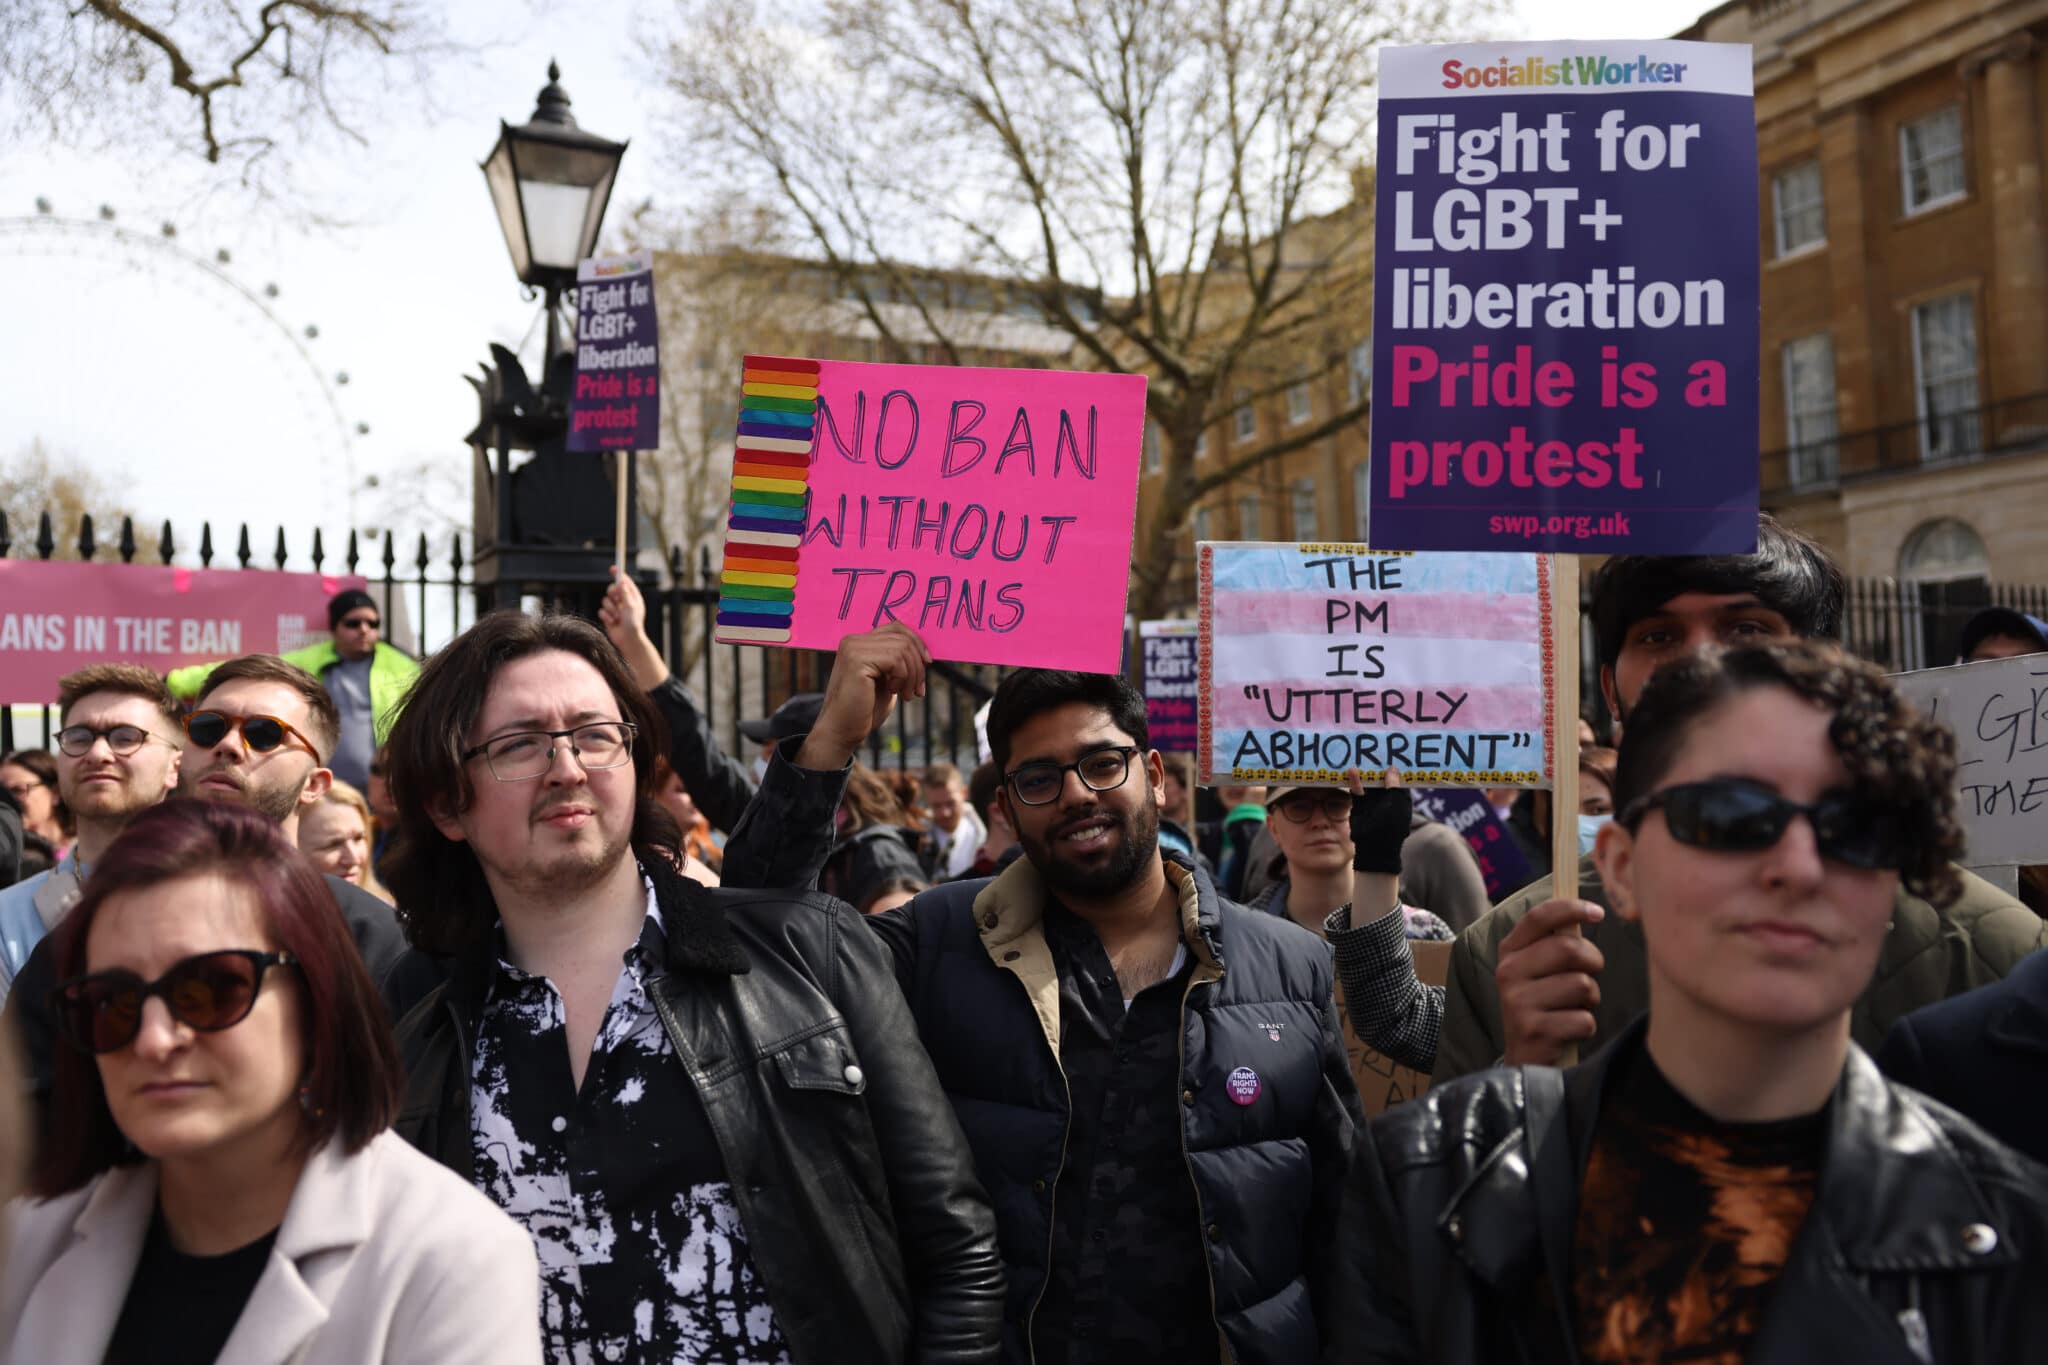 Campaigners Force Parliament Debate On Trans Conversion Therapy Ban